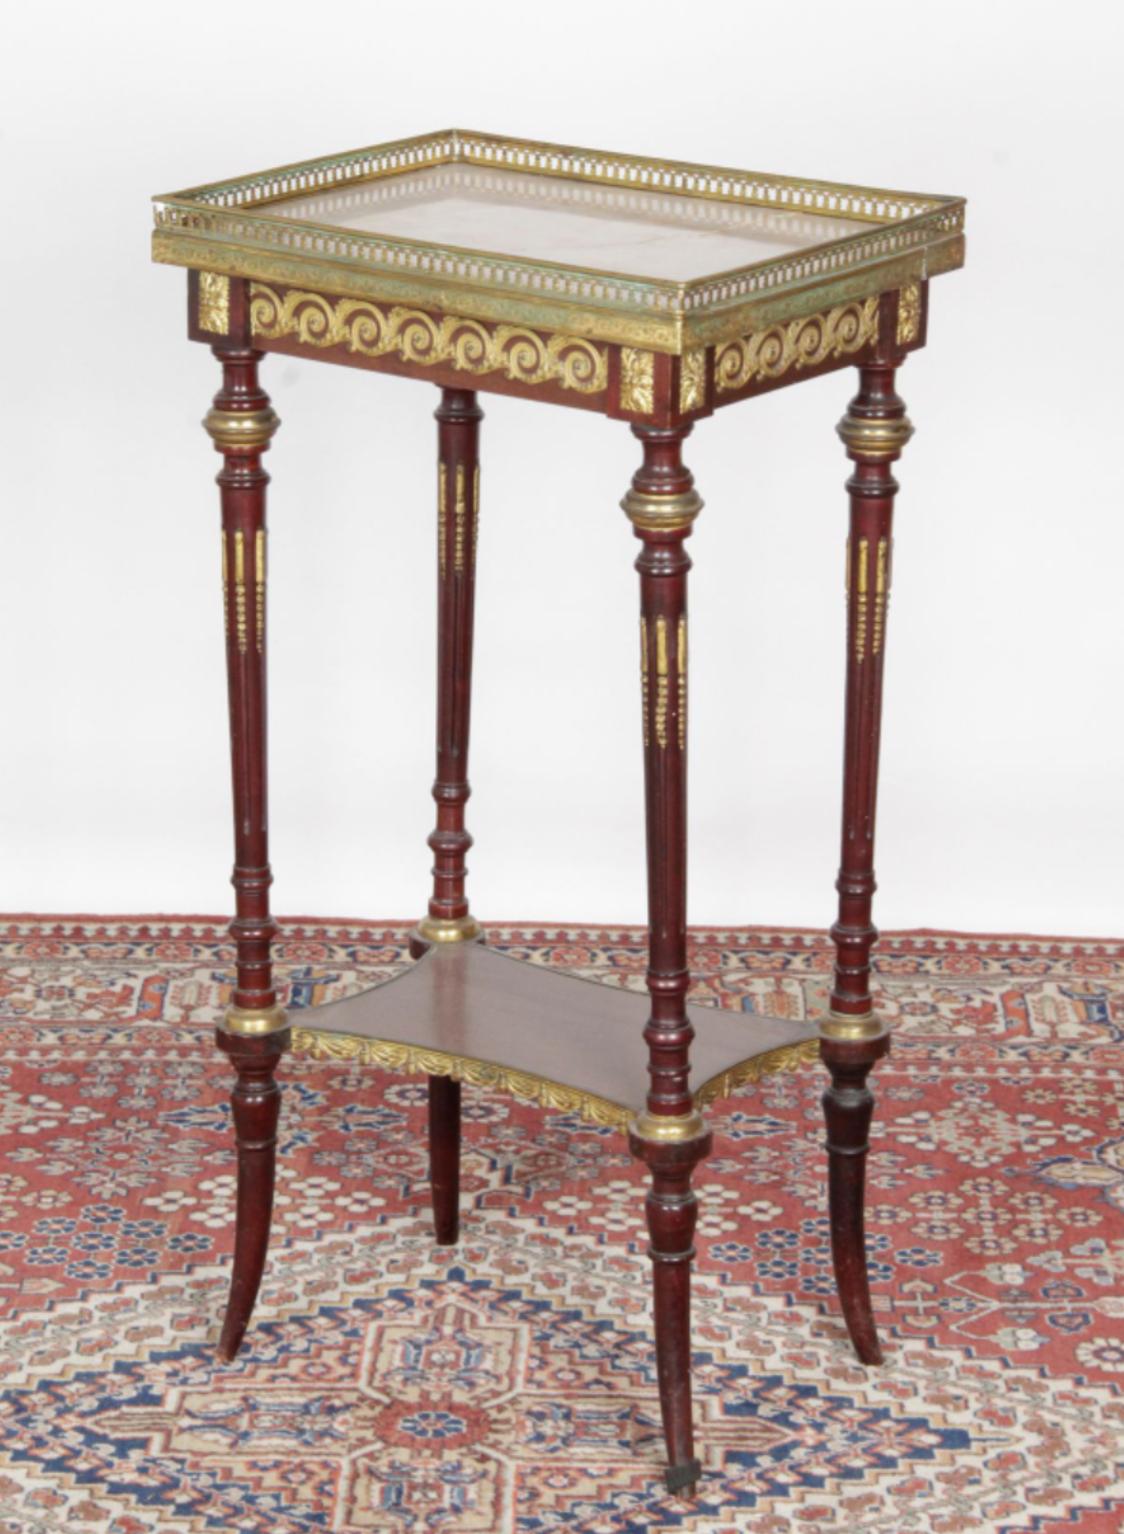 French side table in white marble plate square top and gallery, the four tapered and fluted uprights joined by a crotch shelf and finished with diverging legs. Chiselled and gilded bronze ornamentation such as rings, foliated sconces and post